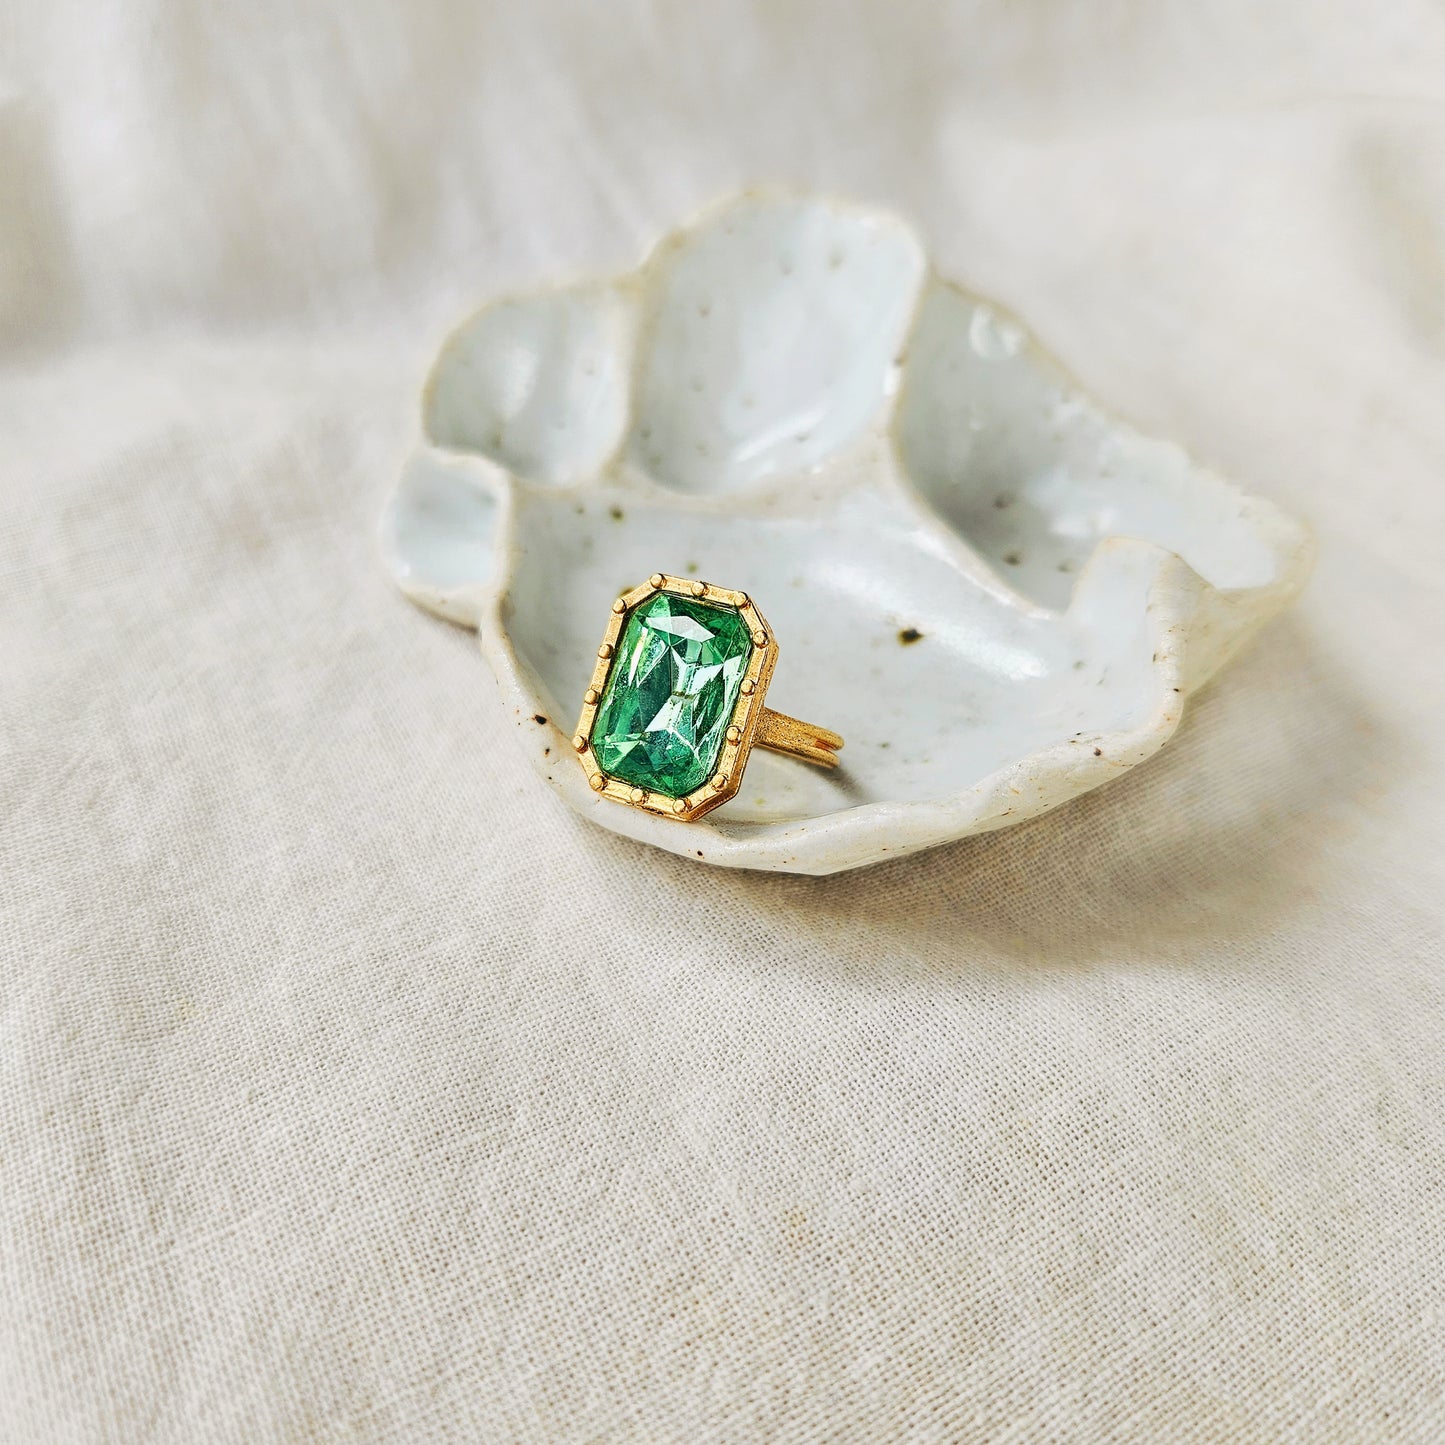 Italian Green Glass Cocktail Ring (6)